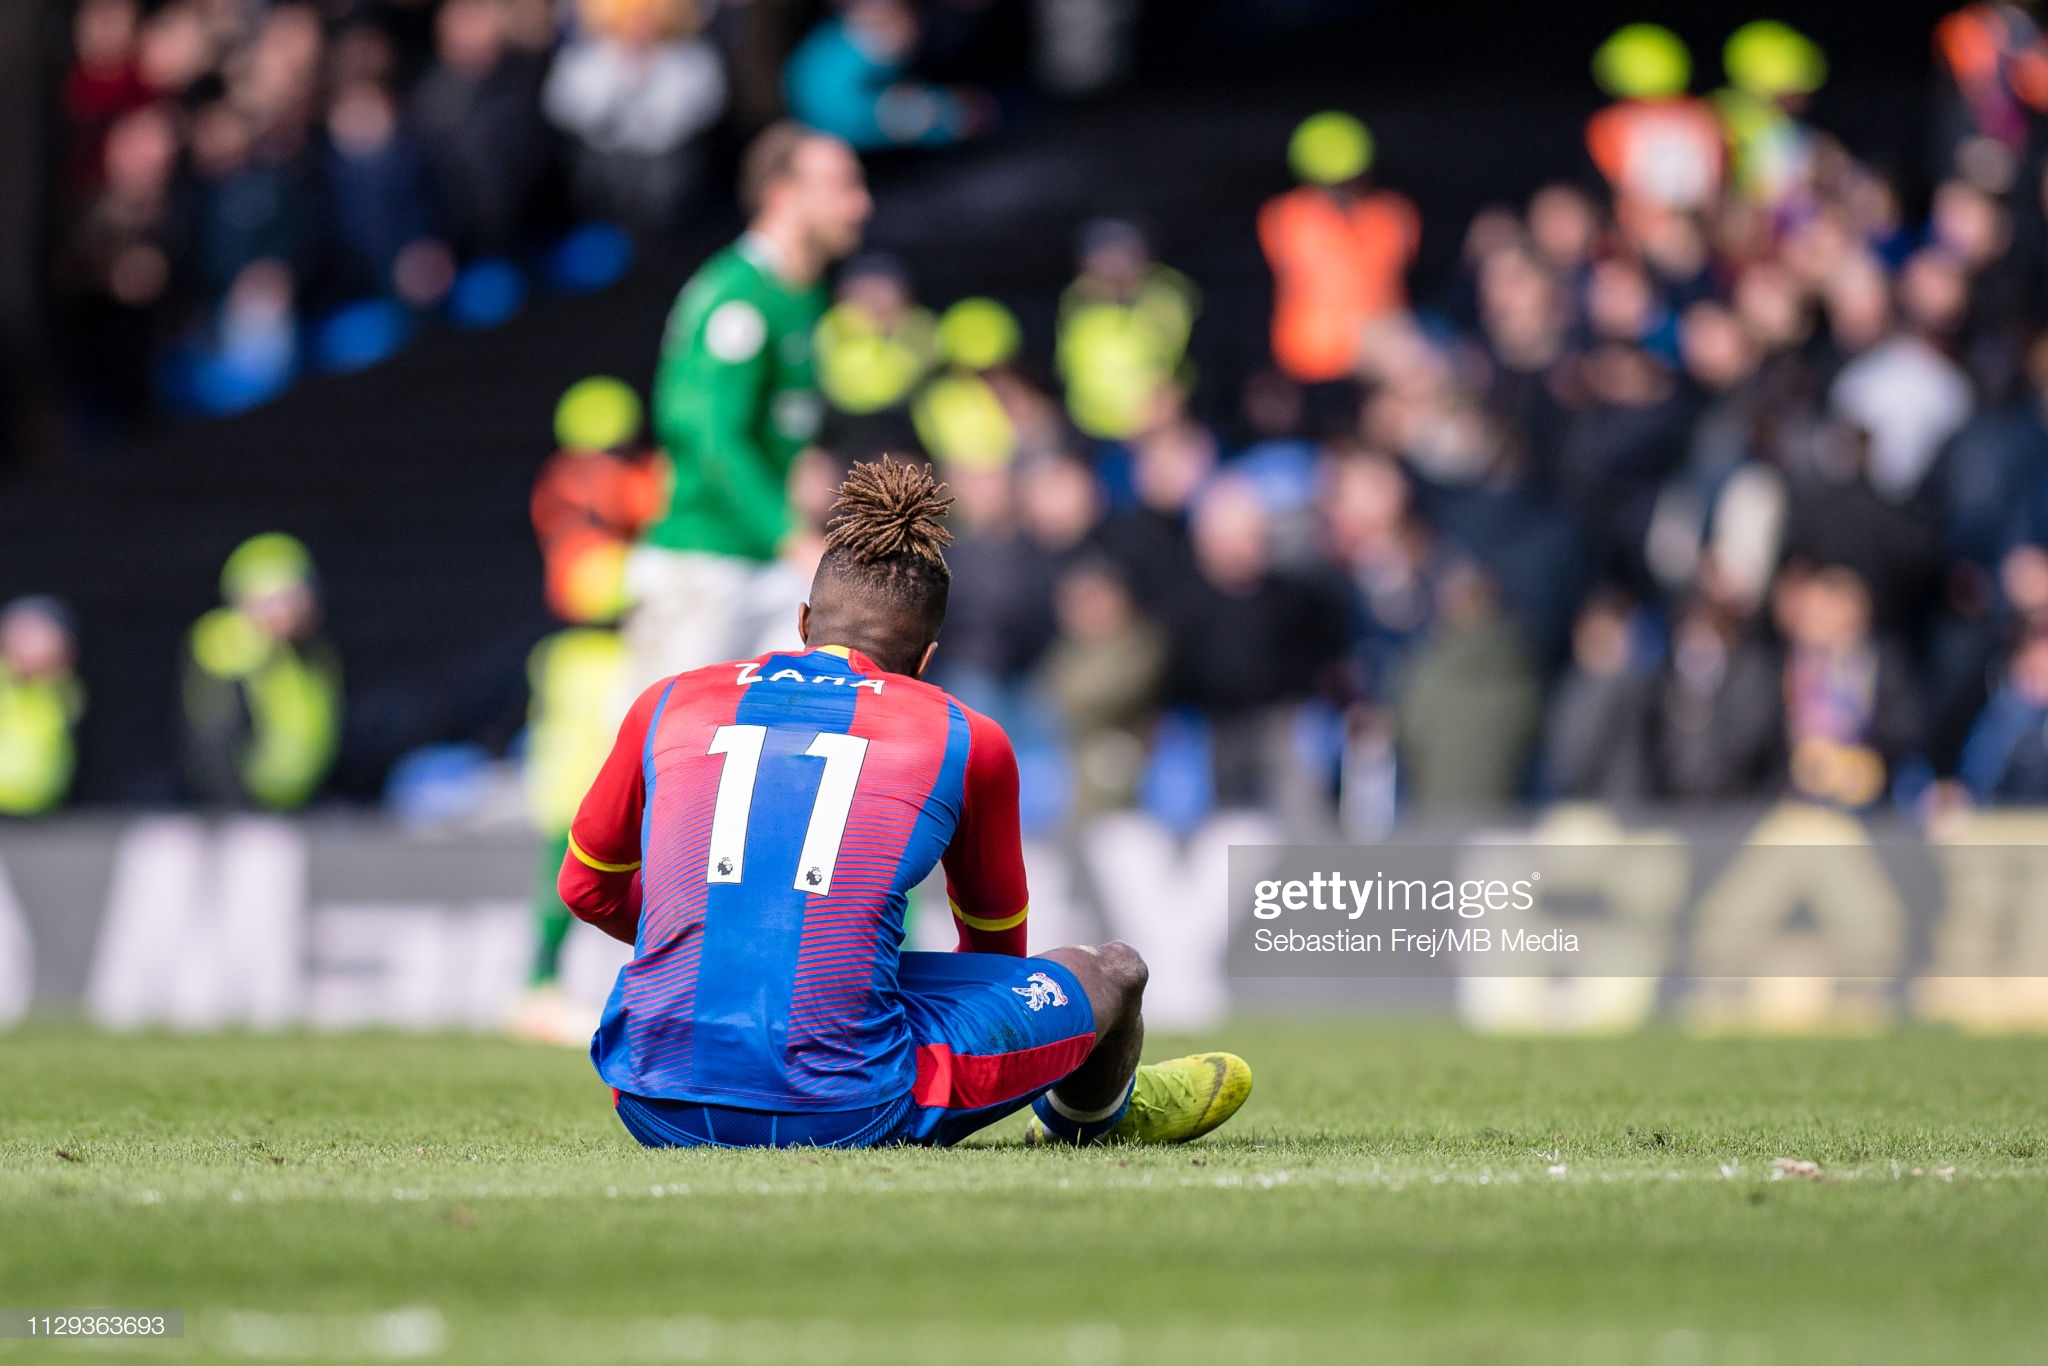 gettyimages-1129363693-2048x2048